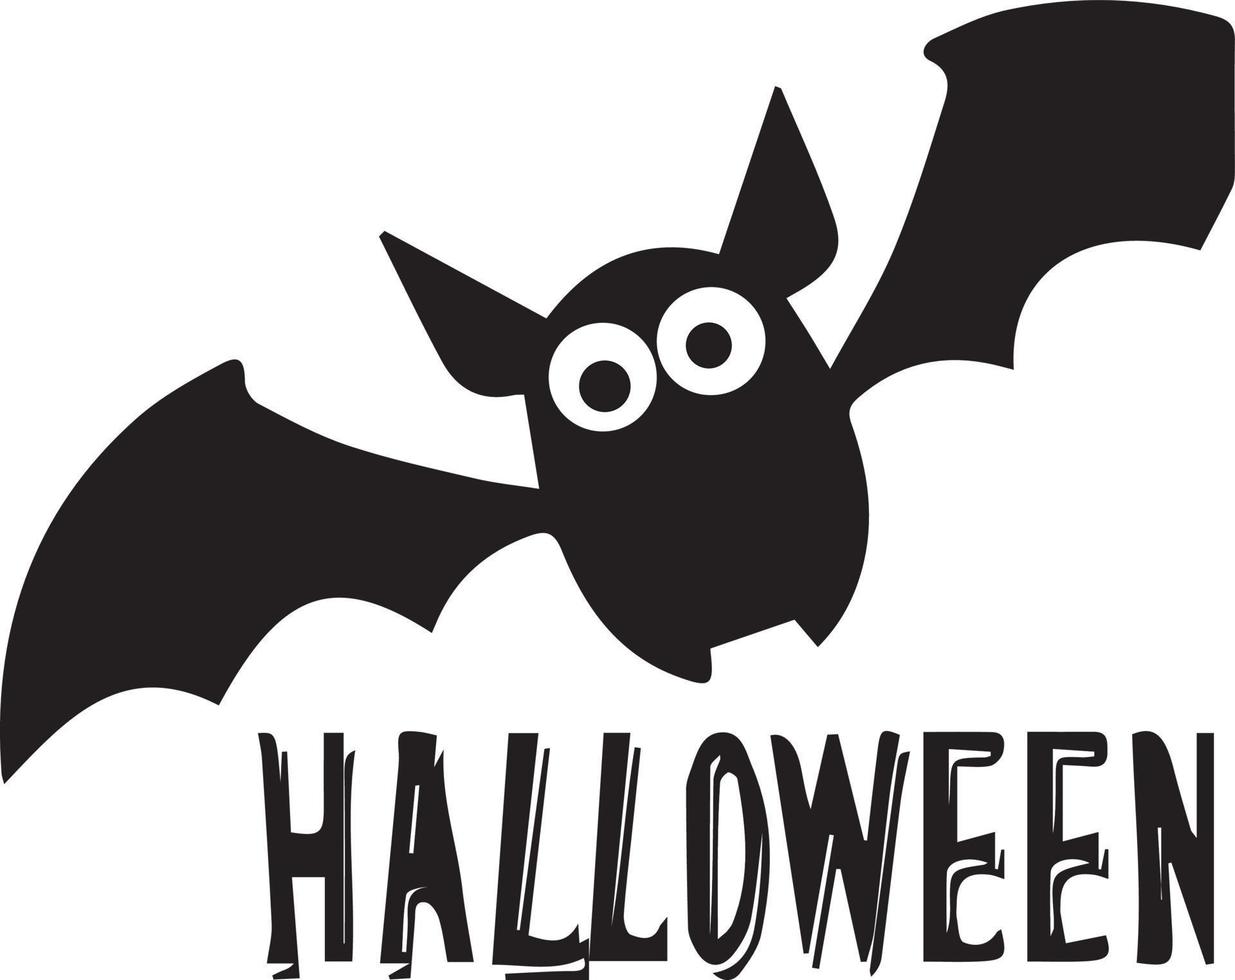 Simple bat design with a Halloween message under vector